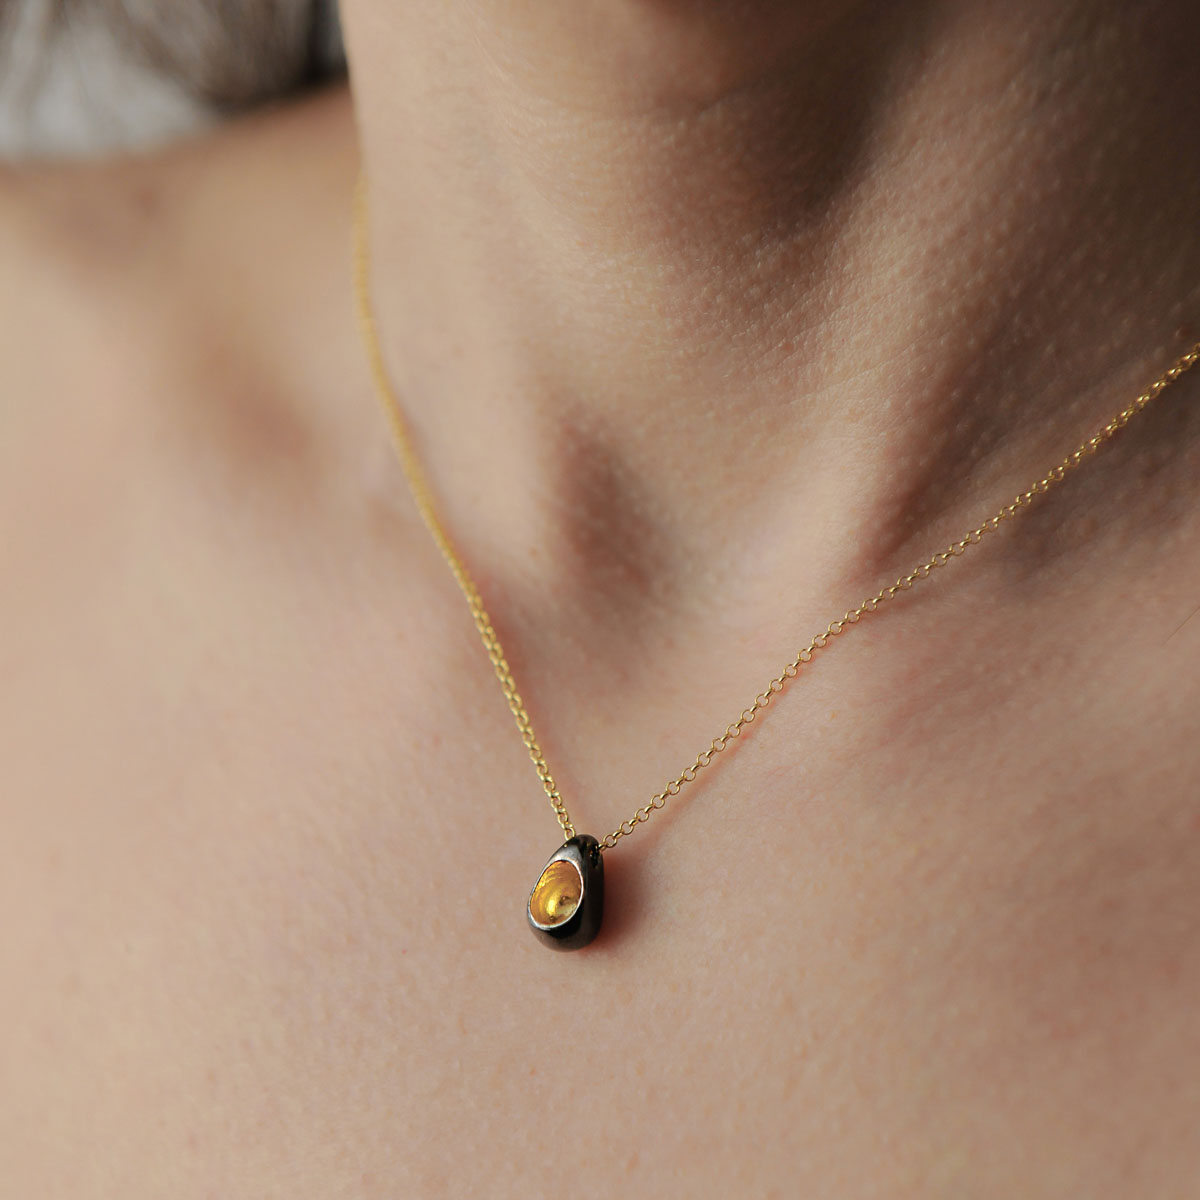 "Seeds and Pits" necklace in gold plated silver. Design and handmade for Bead A Boo jewelry by Katerina Glinou.